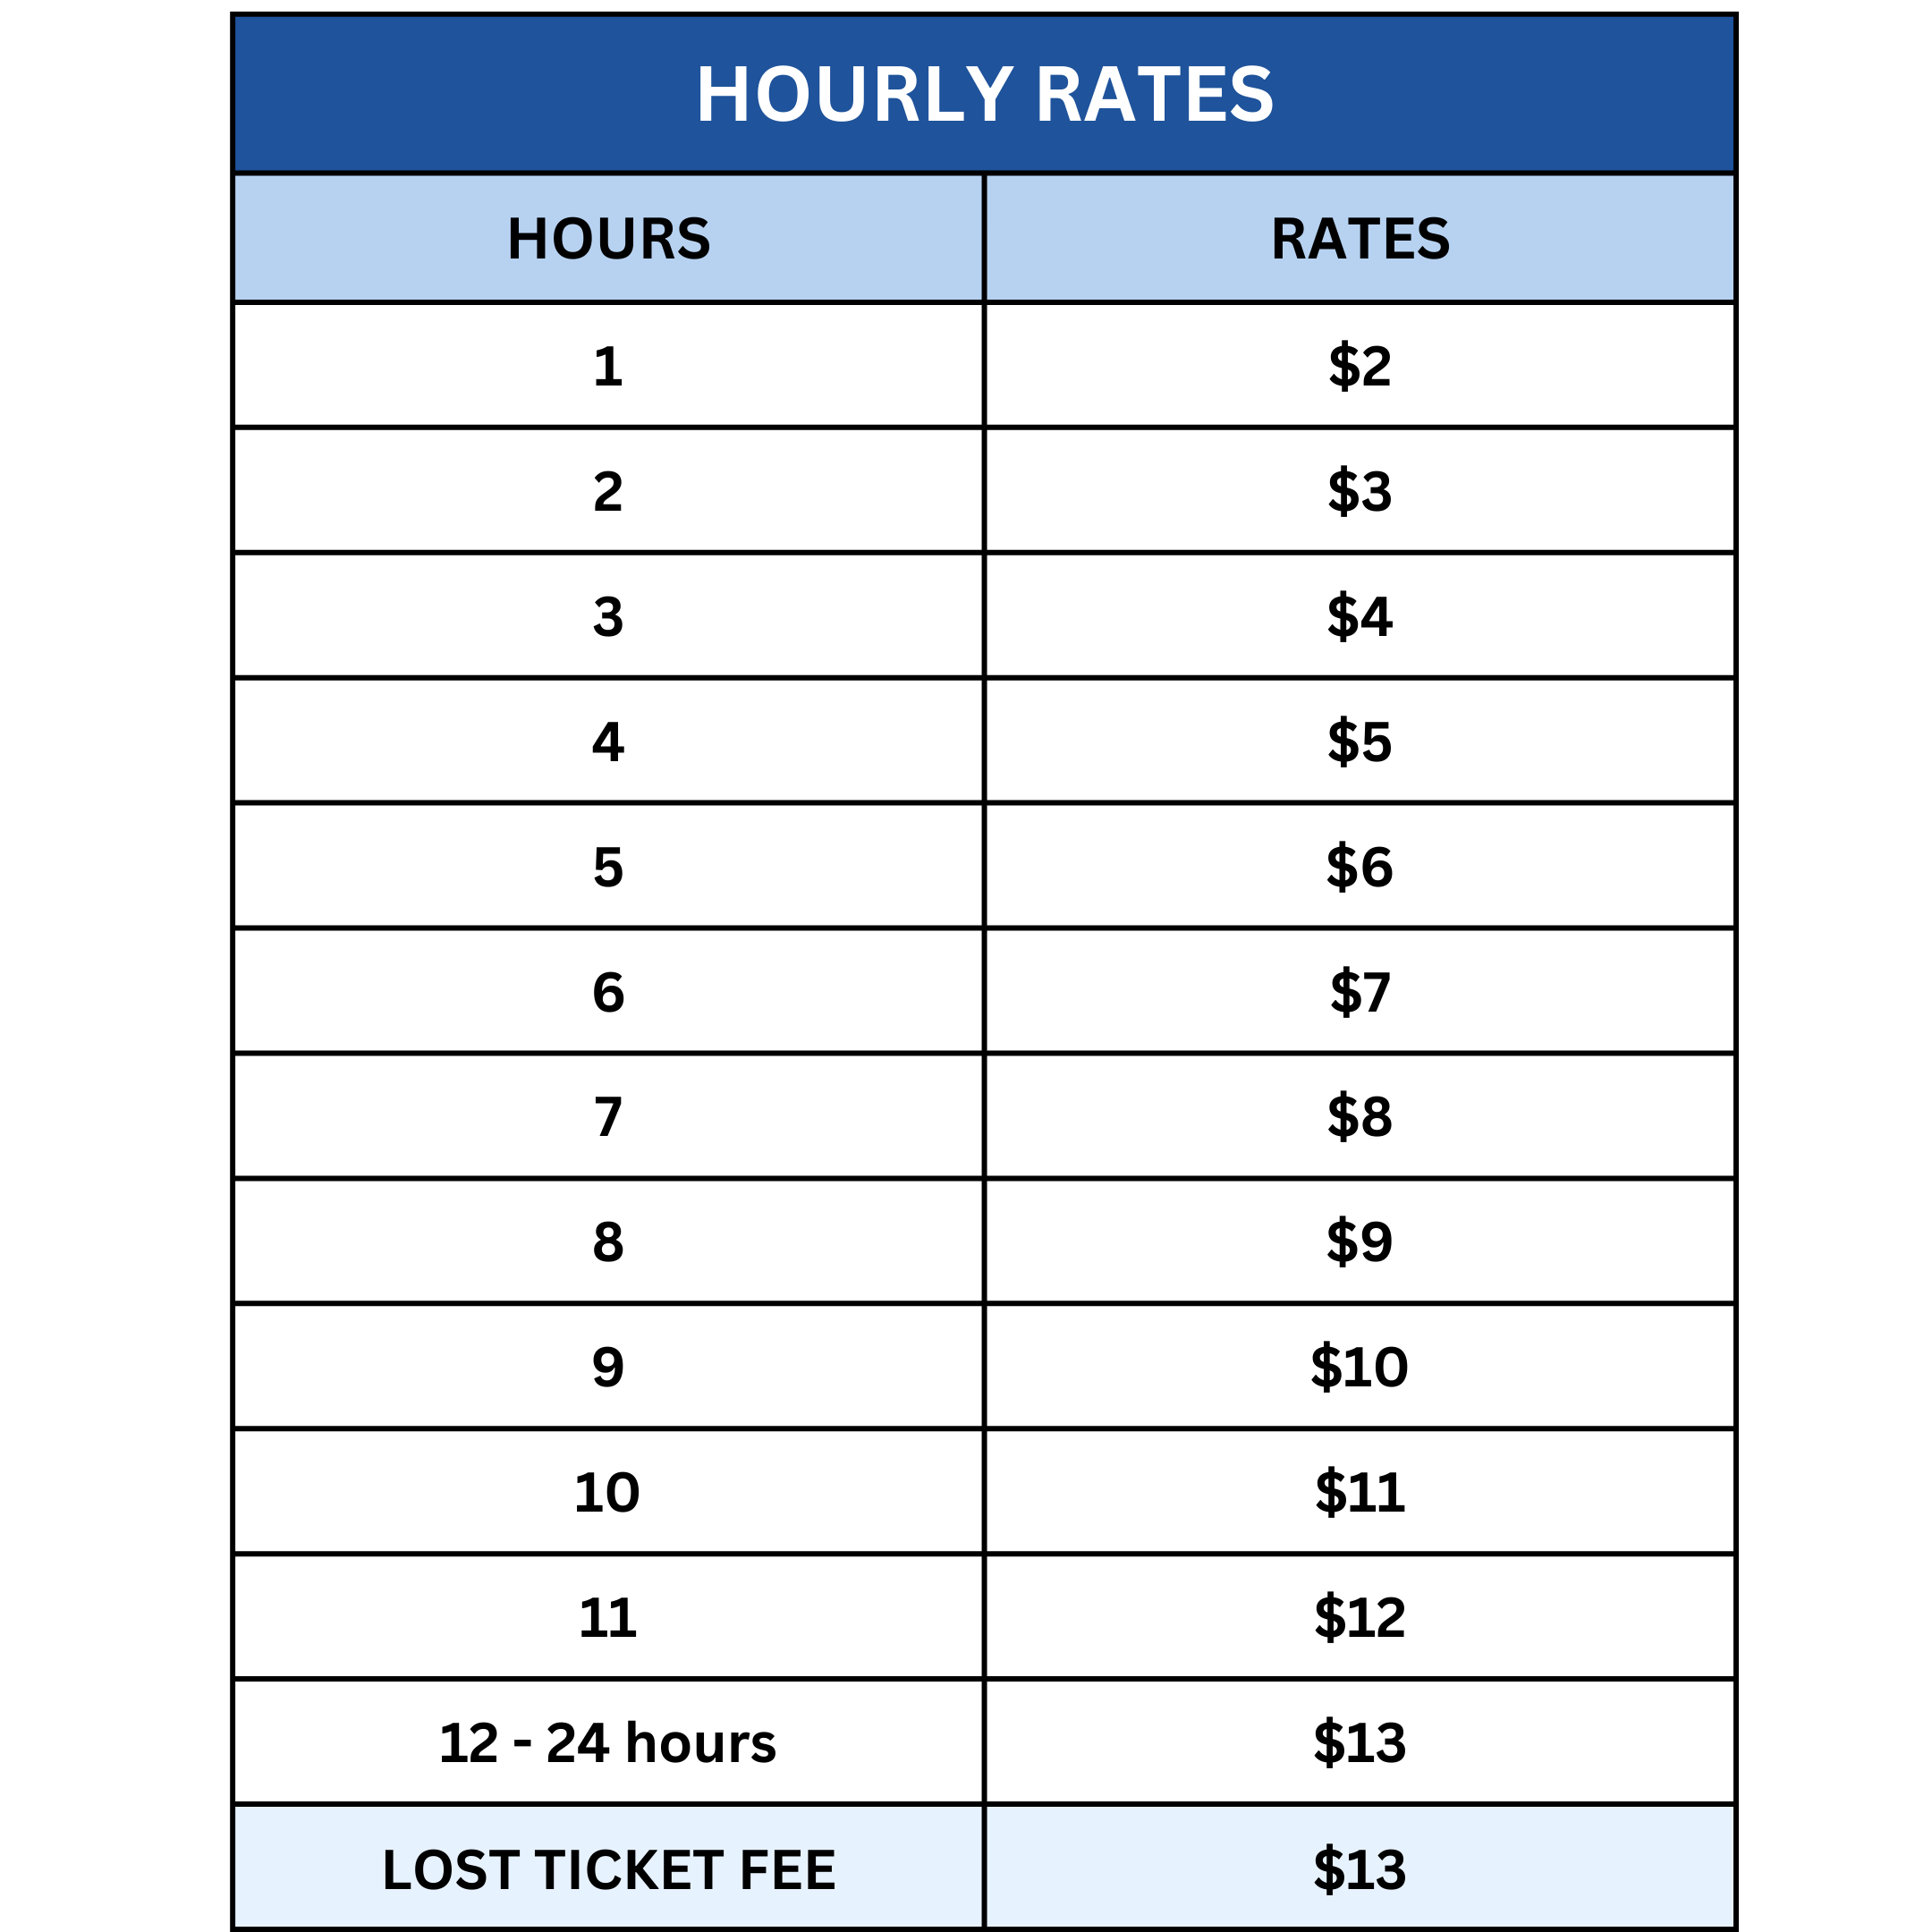 Image shows the hourly rates for parking in the garage, contact staff for assistance